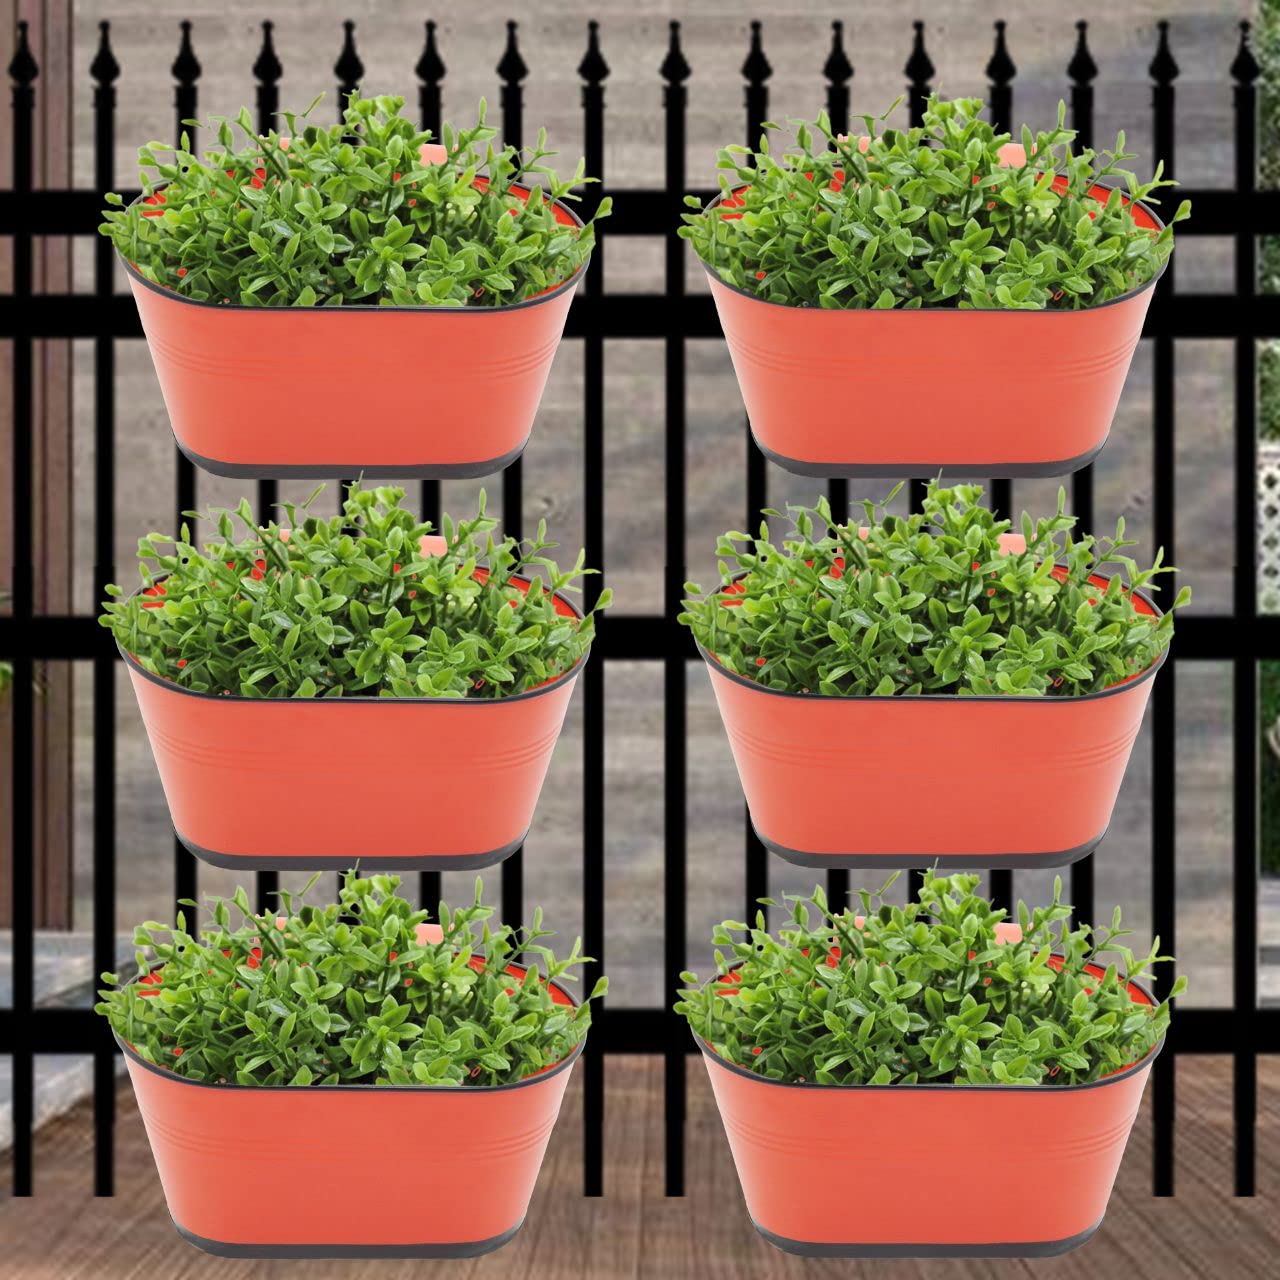 Oval Red 10 inches Balcony Railing Planter (Set of 6)